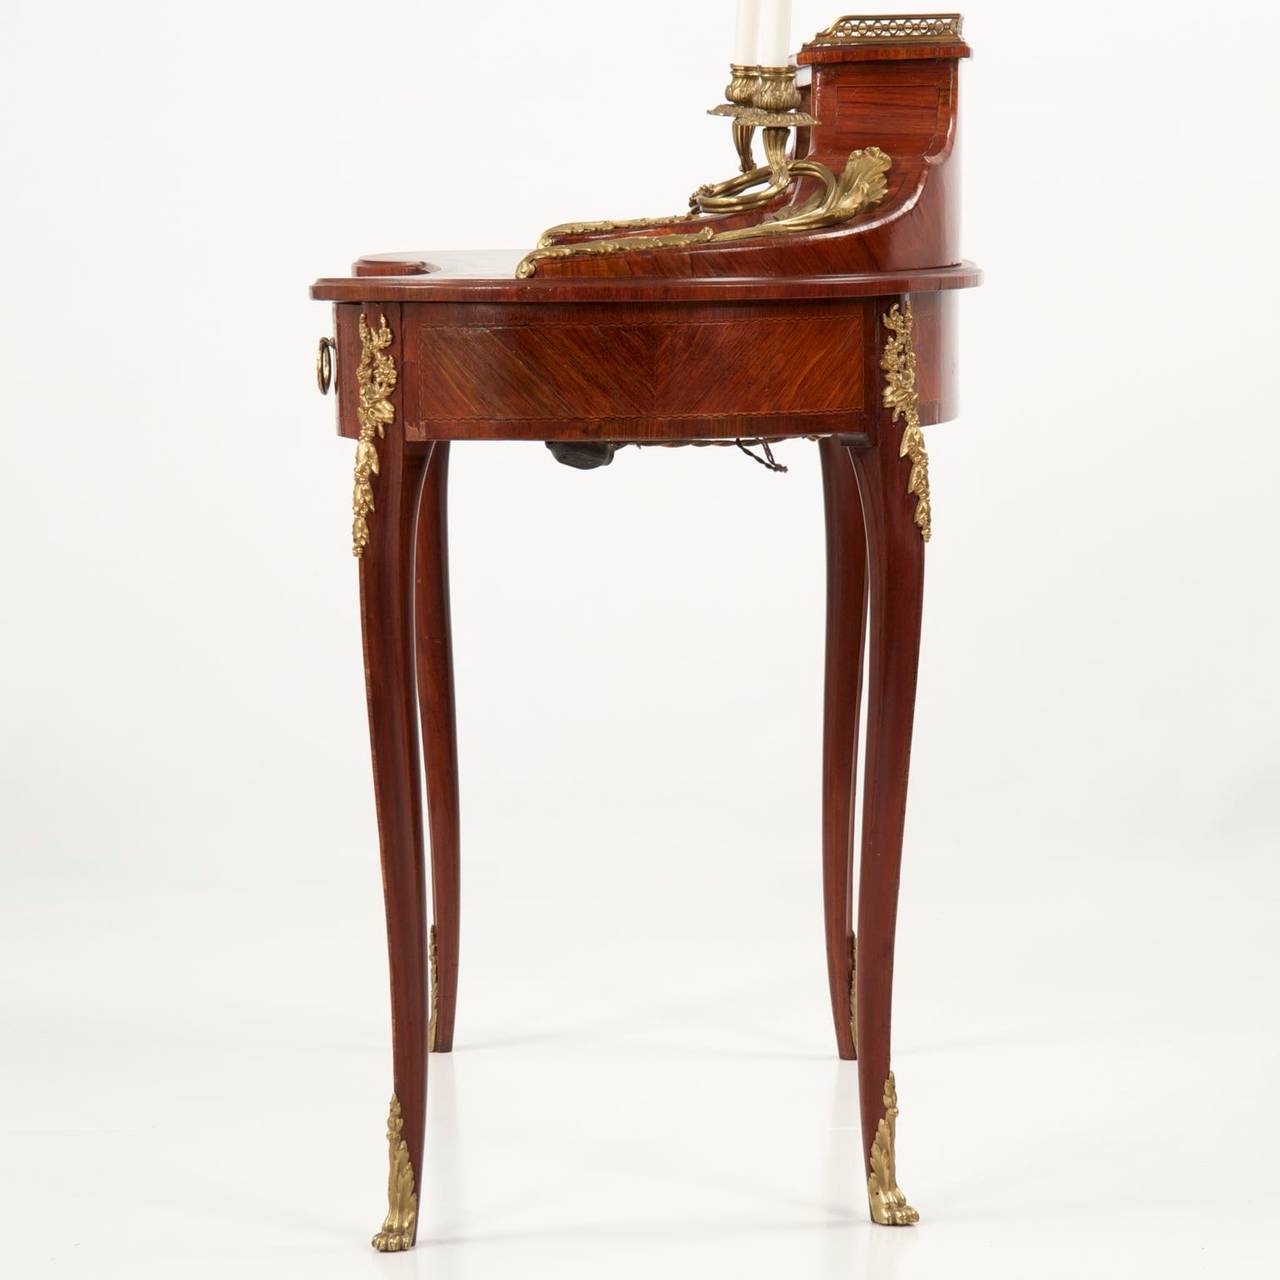 Bronze French Louis XV Style Inlaid Kidney Form Writing Desk, 19th Century